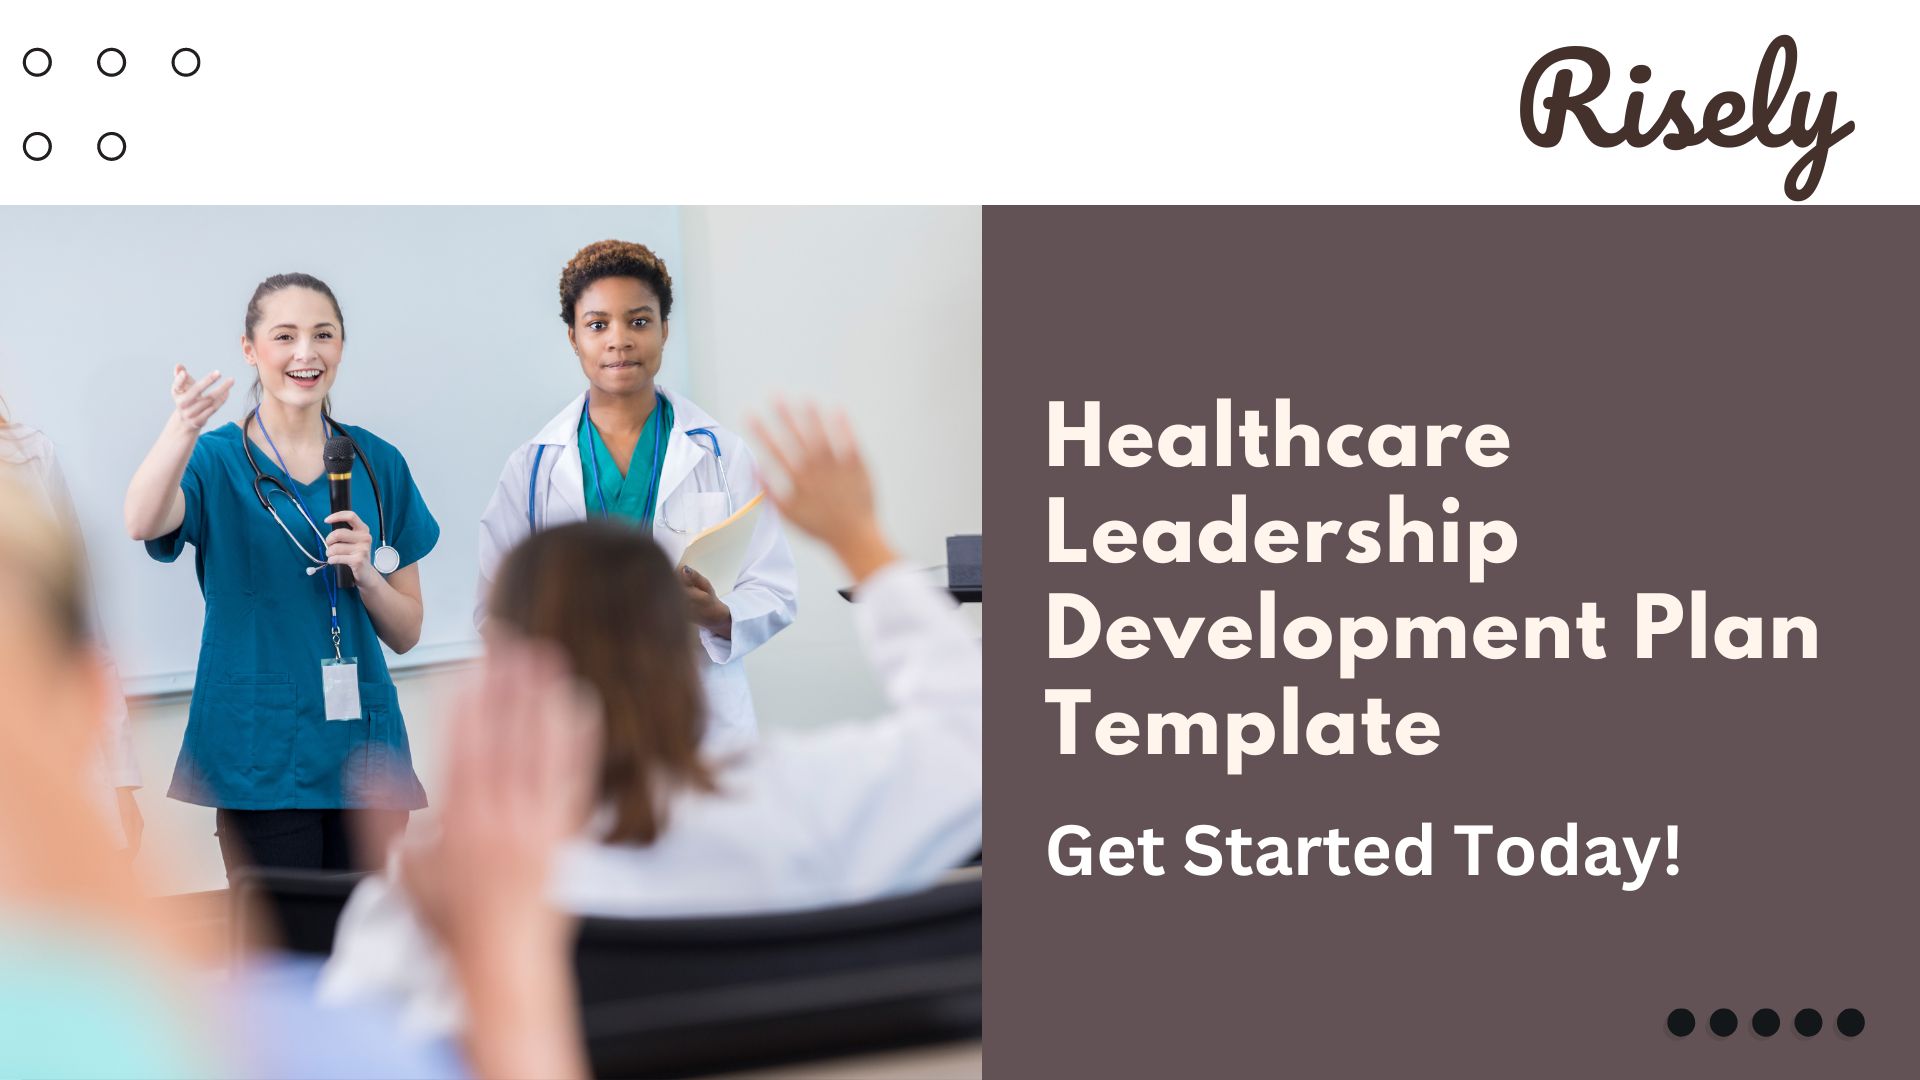 Healthcare Leadership Development Plan Template: Get Started Today!